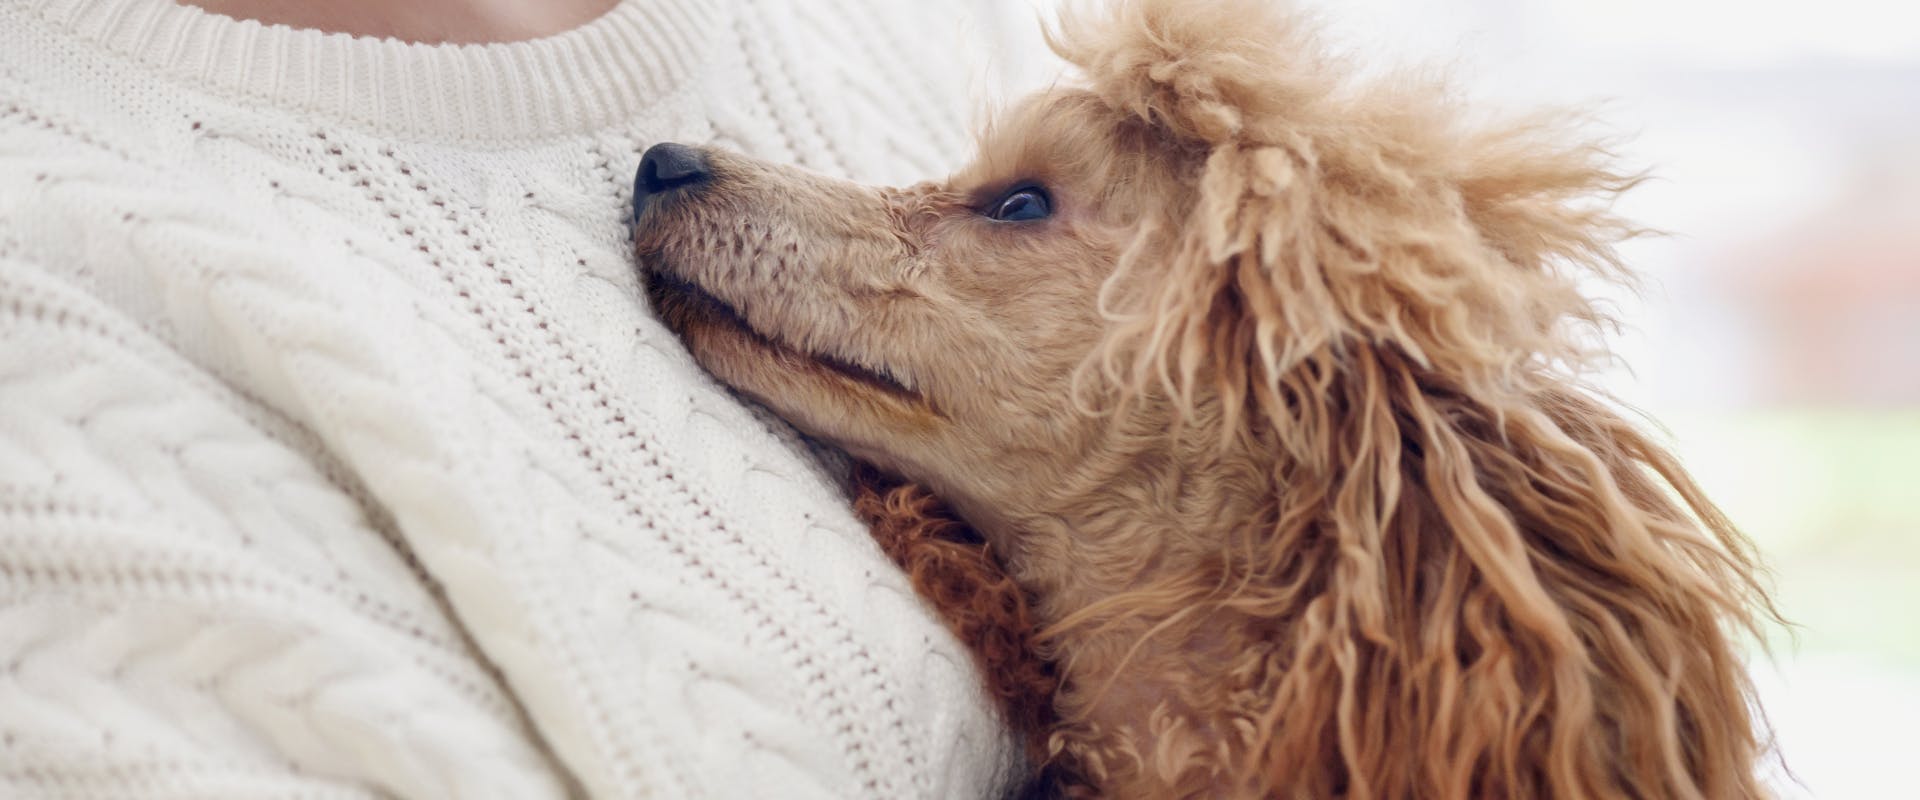 a poodle mix looking up at a person wearing a white sweater while resting its head on their chest